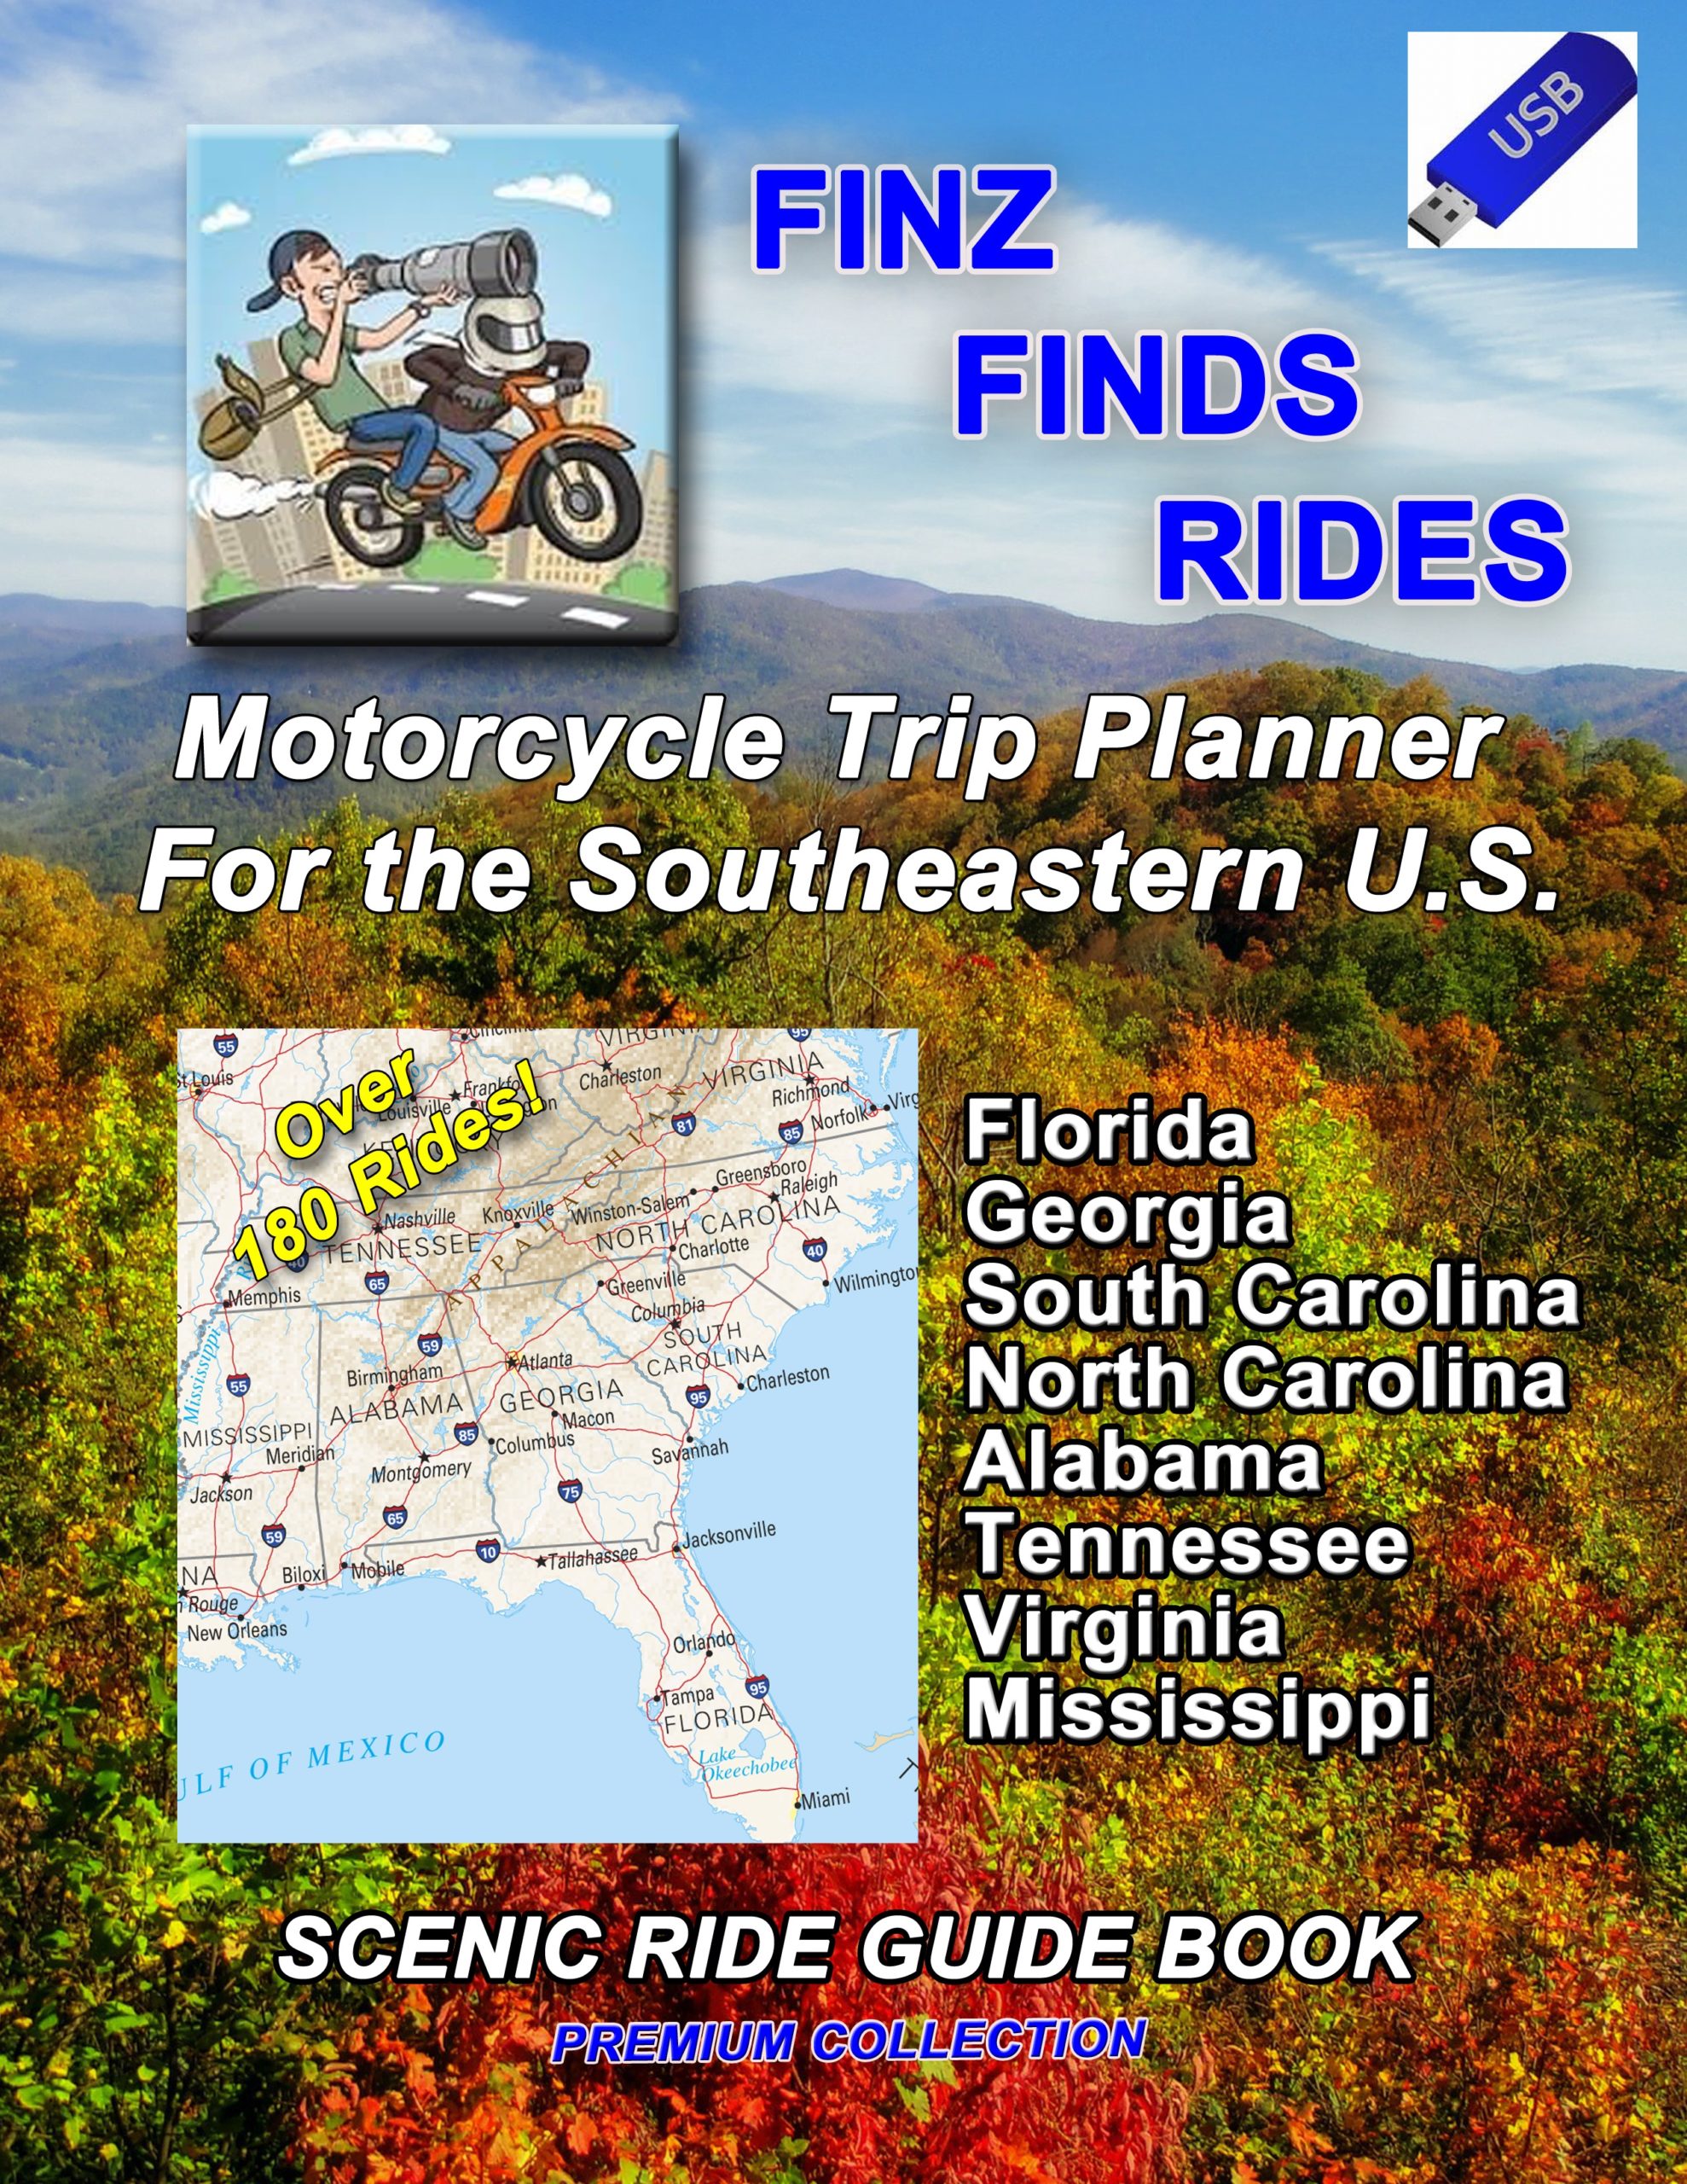 Southeastern USA adventure package